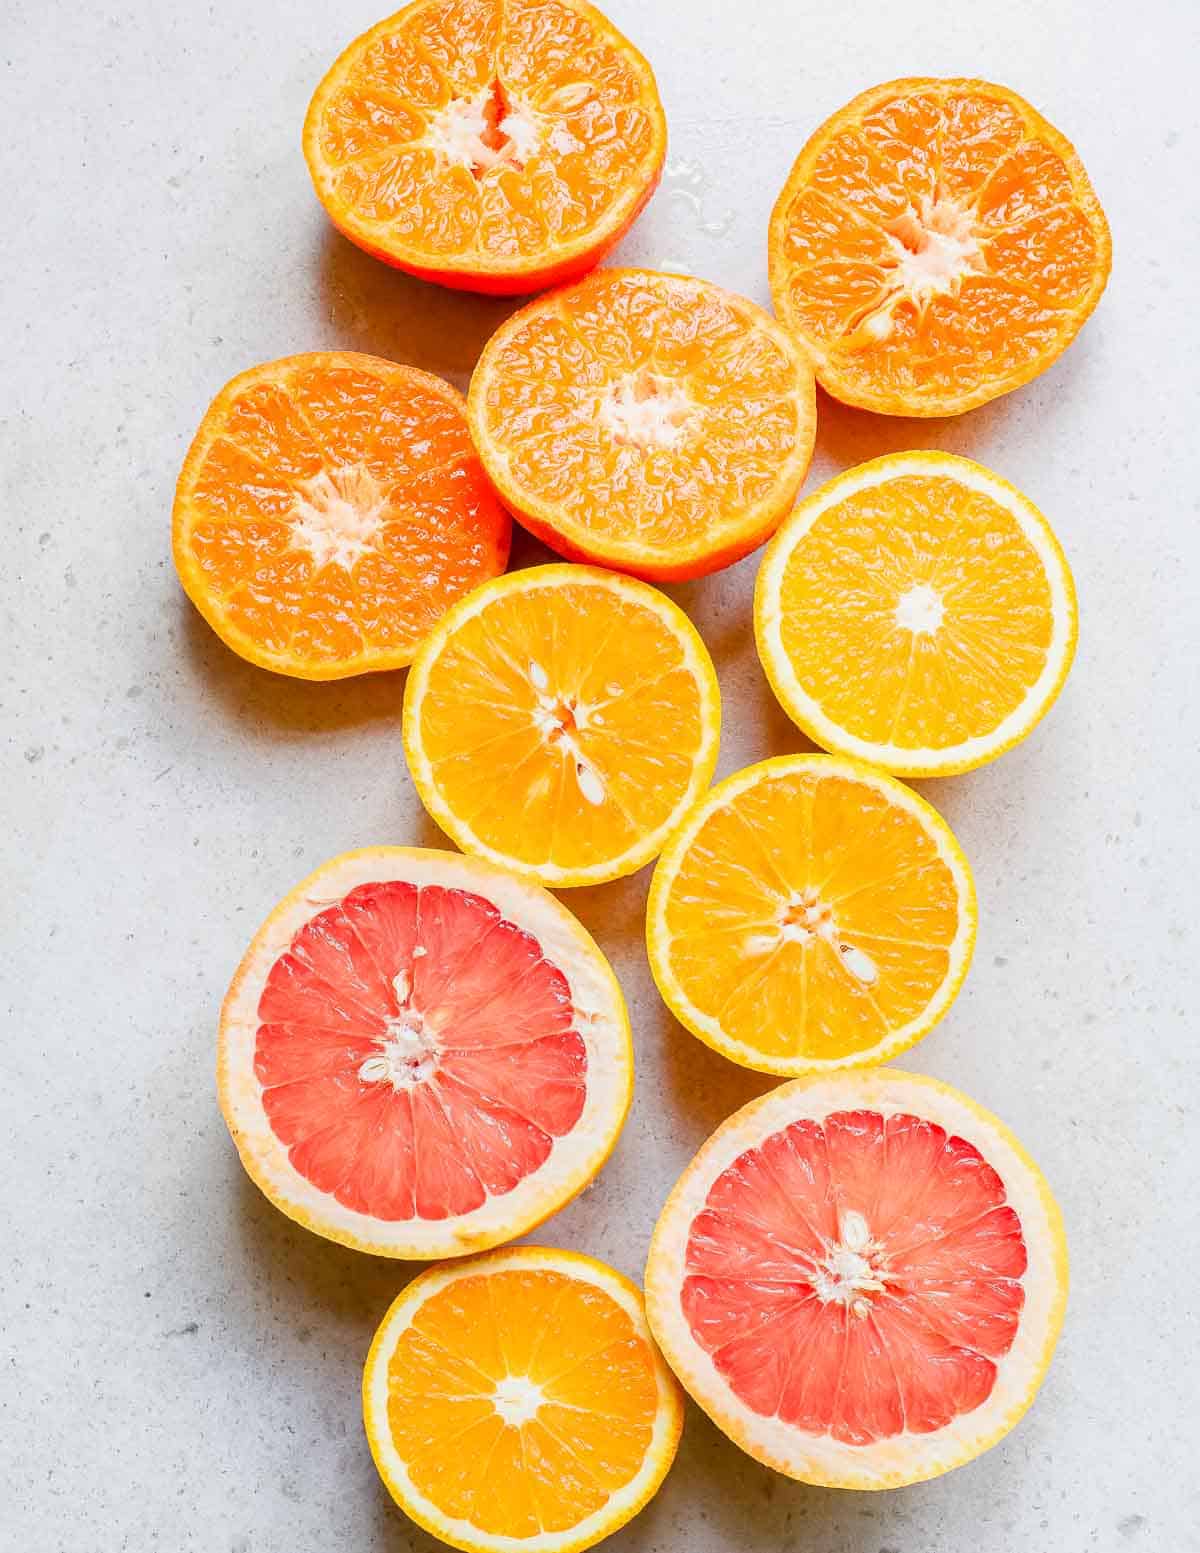 Sliced oranges and grapefruits on a white surface.